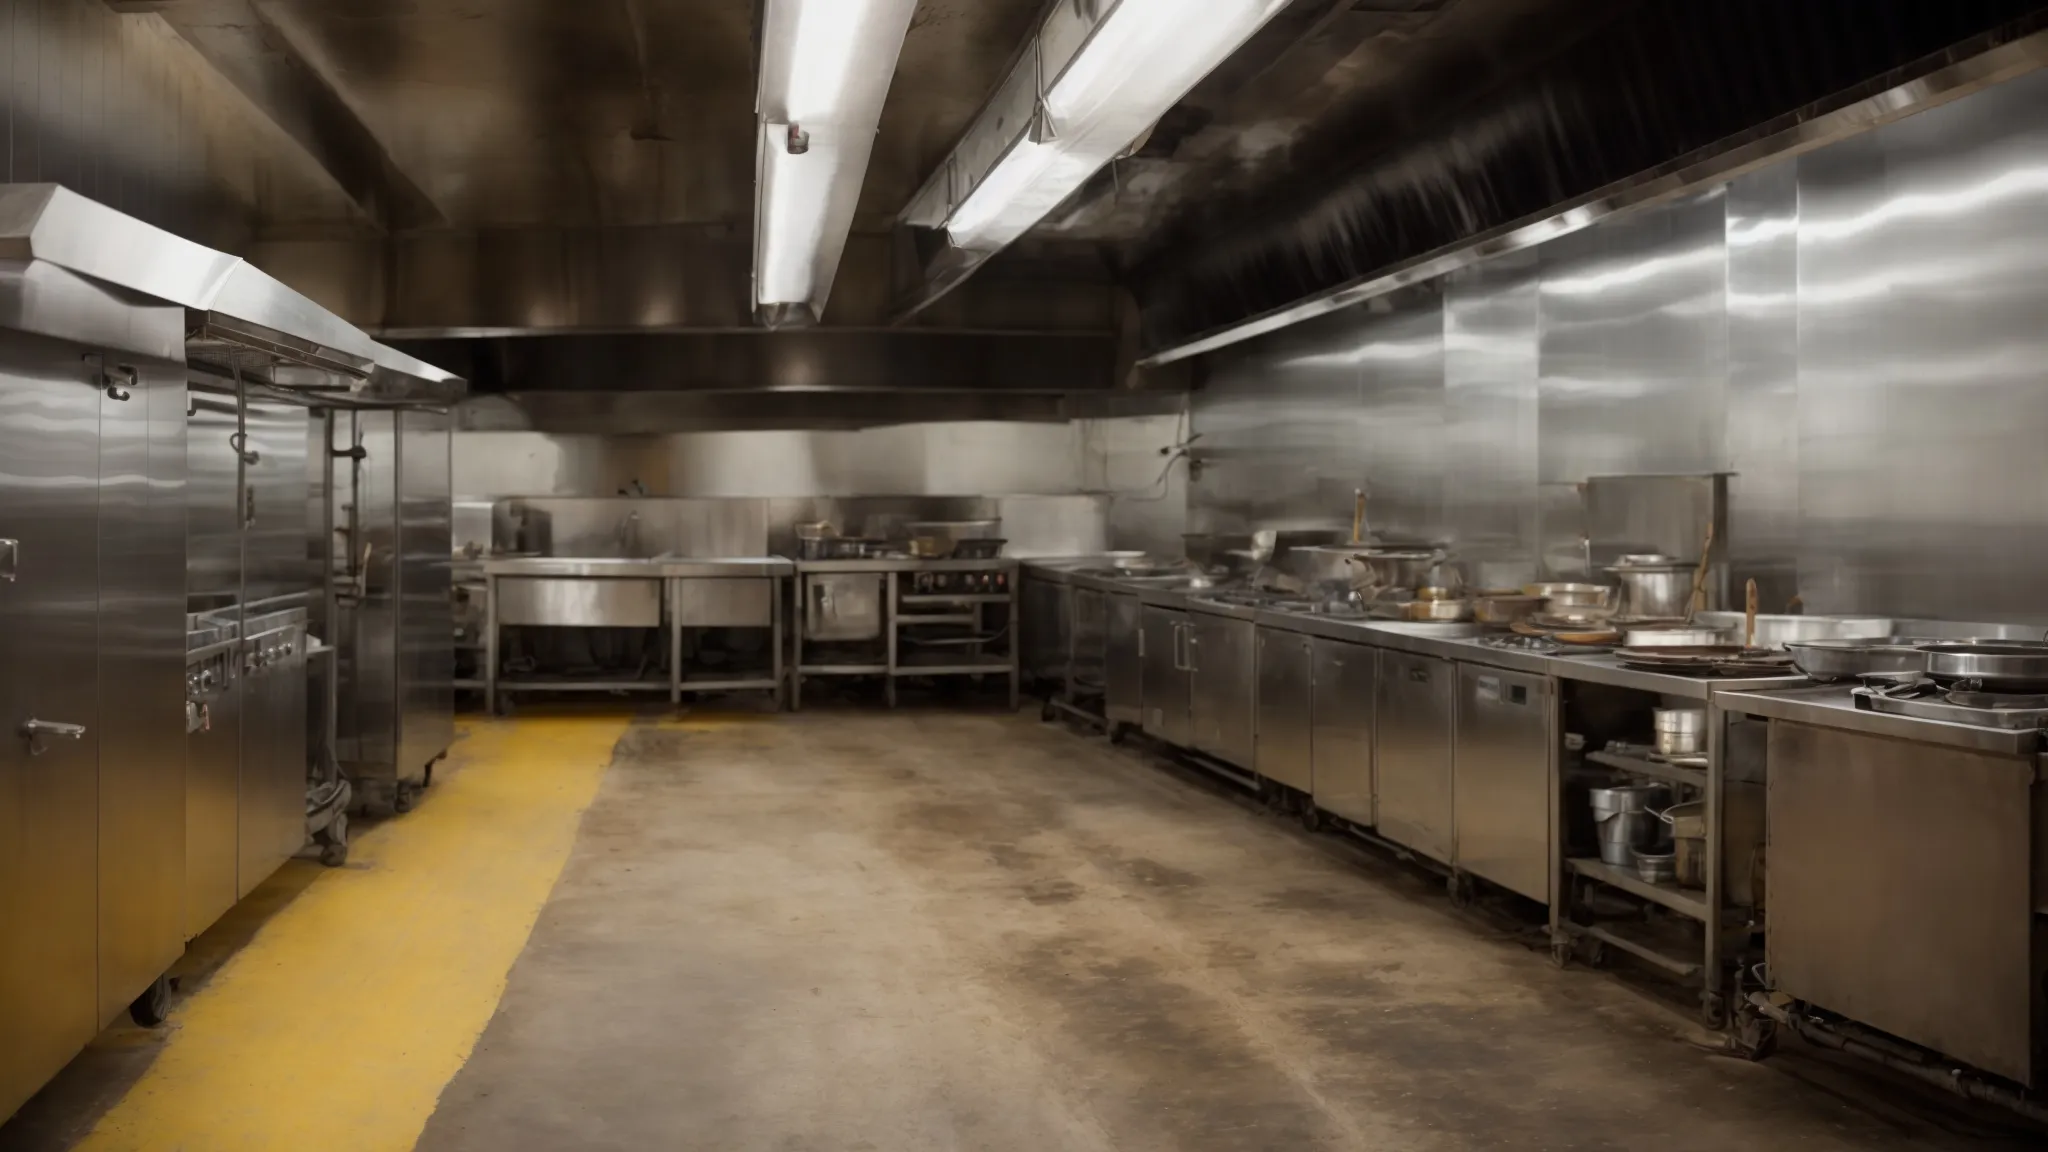 a thick layer of grease coats the interior of a commercial kitchen's exhaust hood, hinting at long-term neglect.